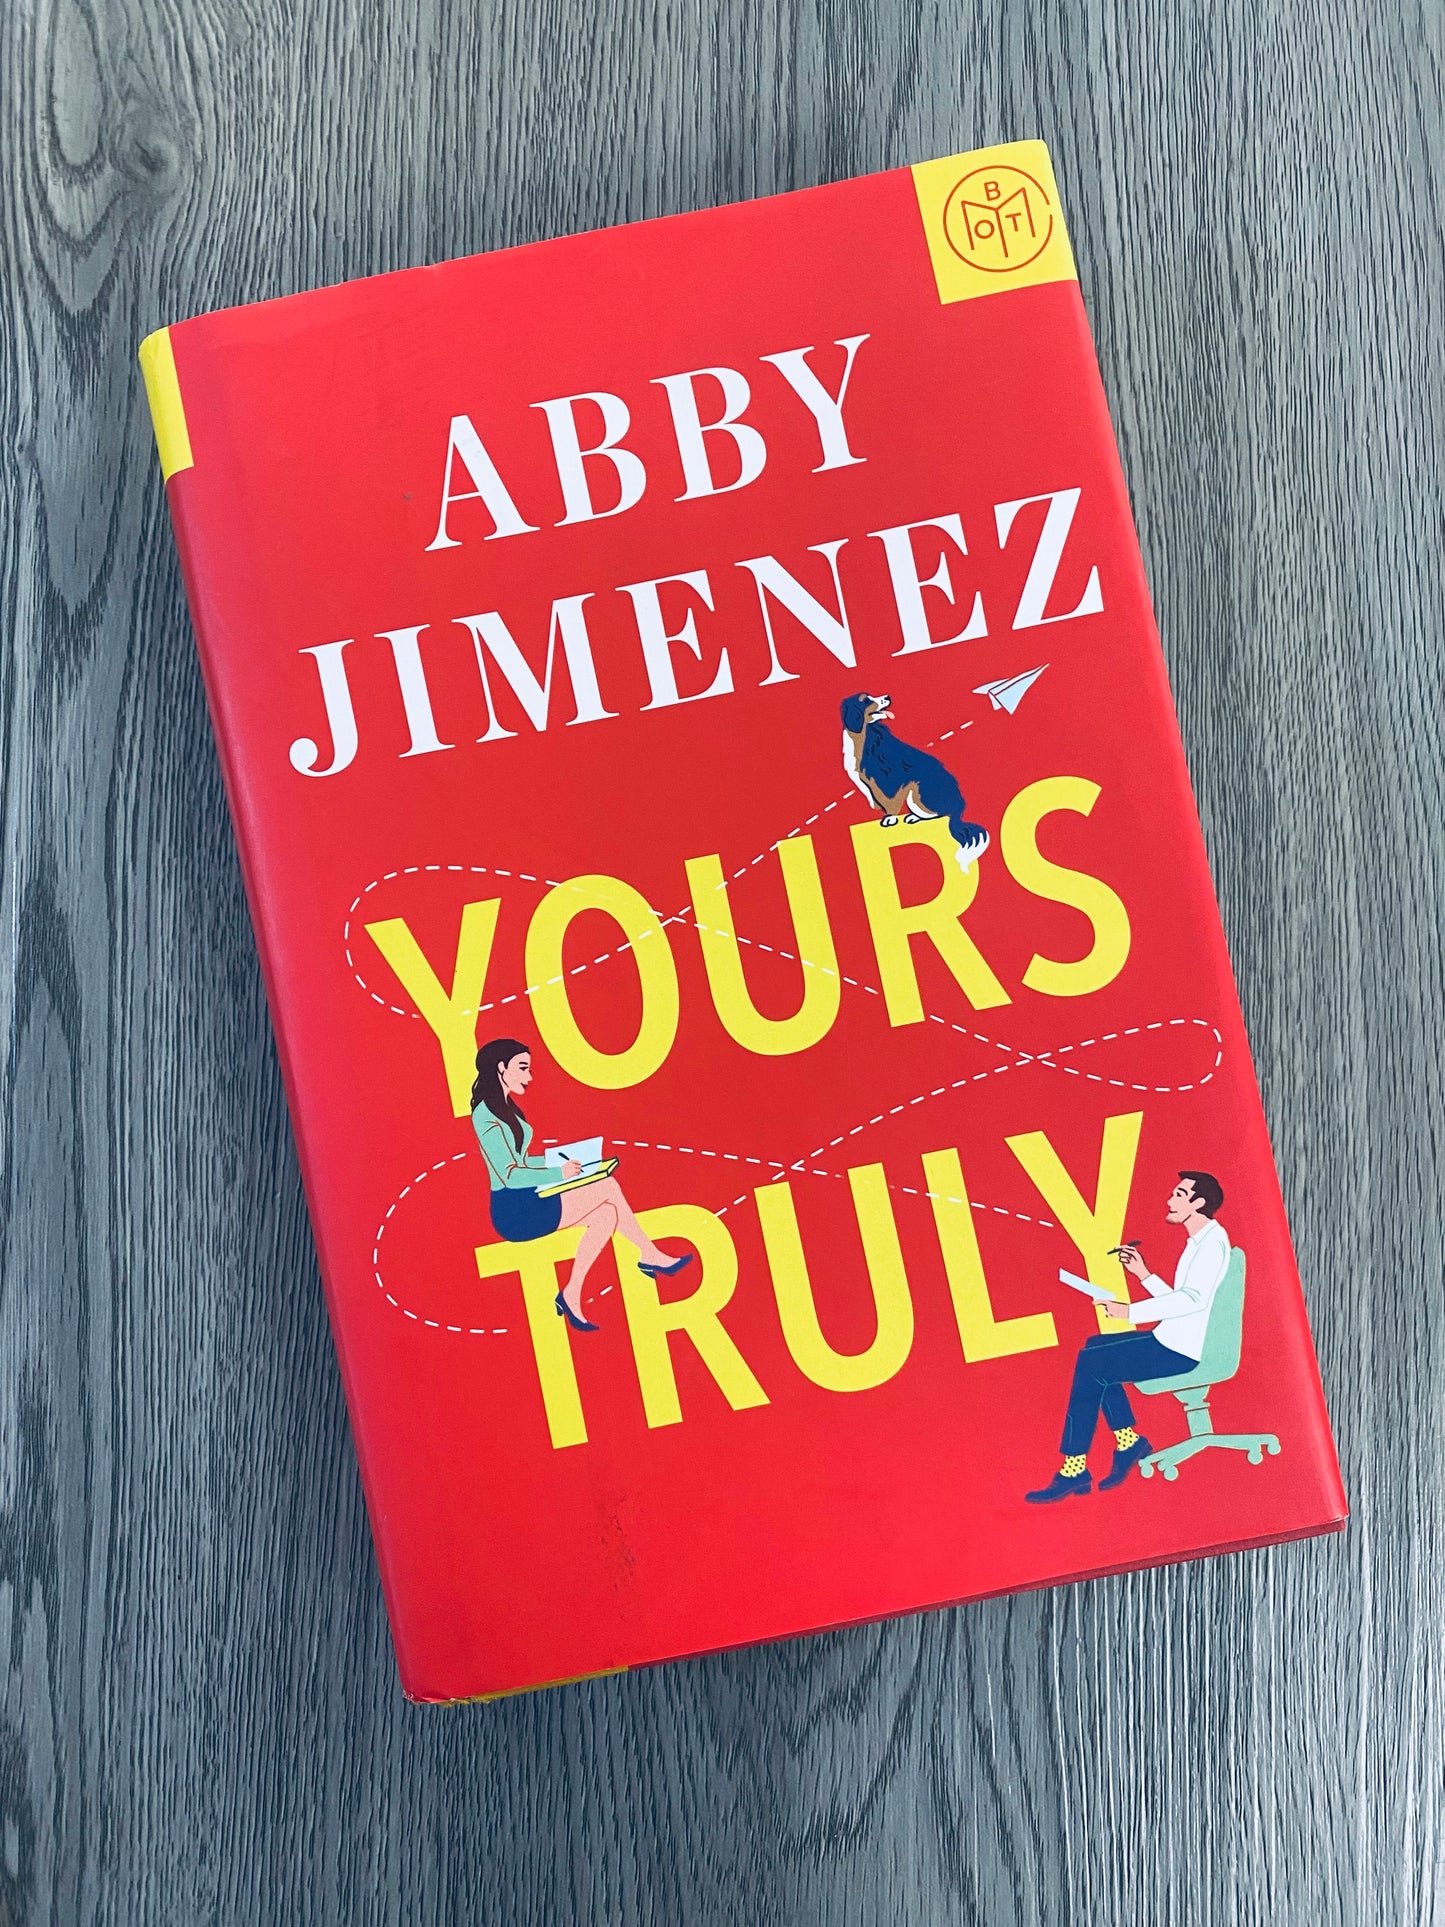 Yours Truly (Part of Your World #2)  by Abby Jimenez